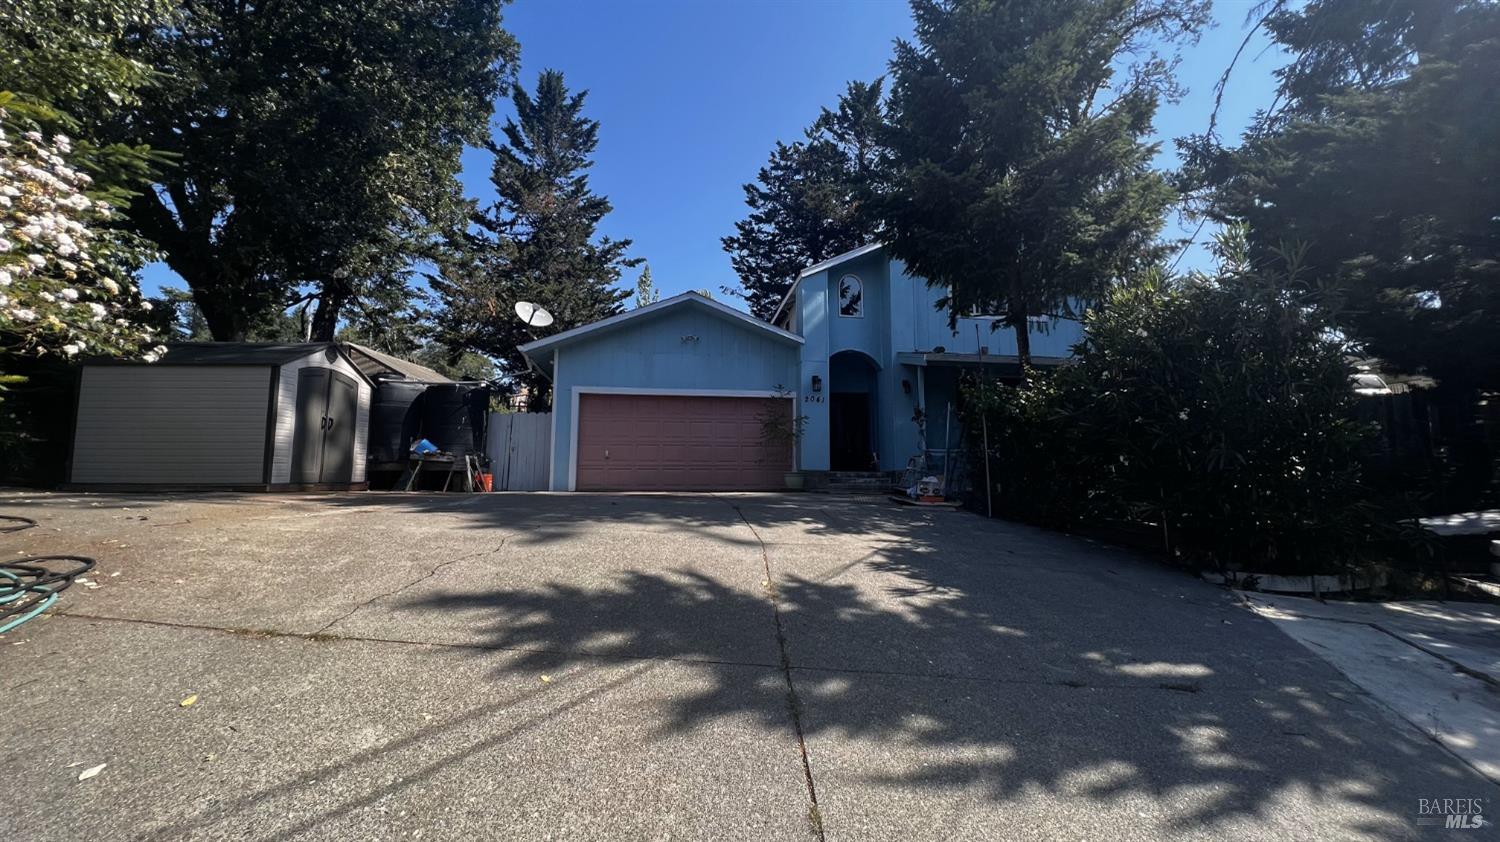 Photo of 2041 Peacock Dr in Willits, CA